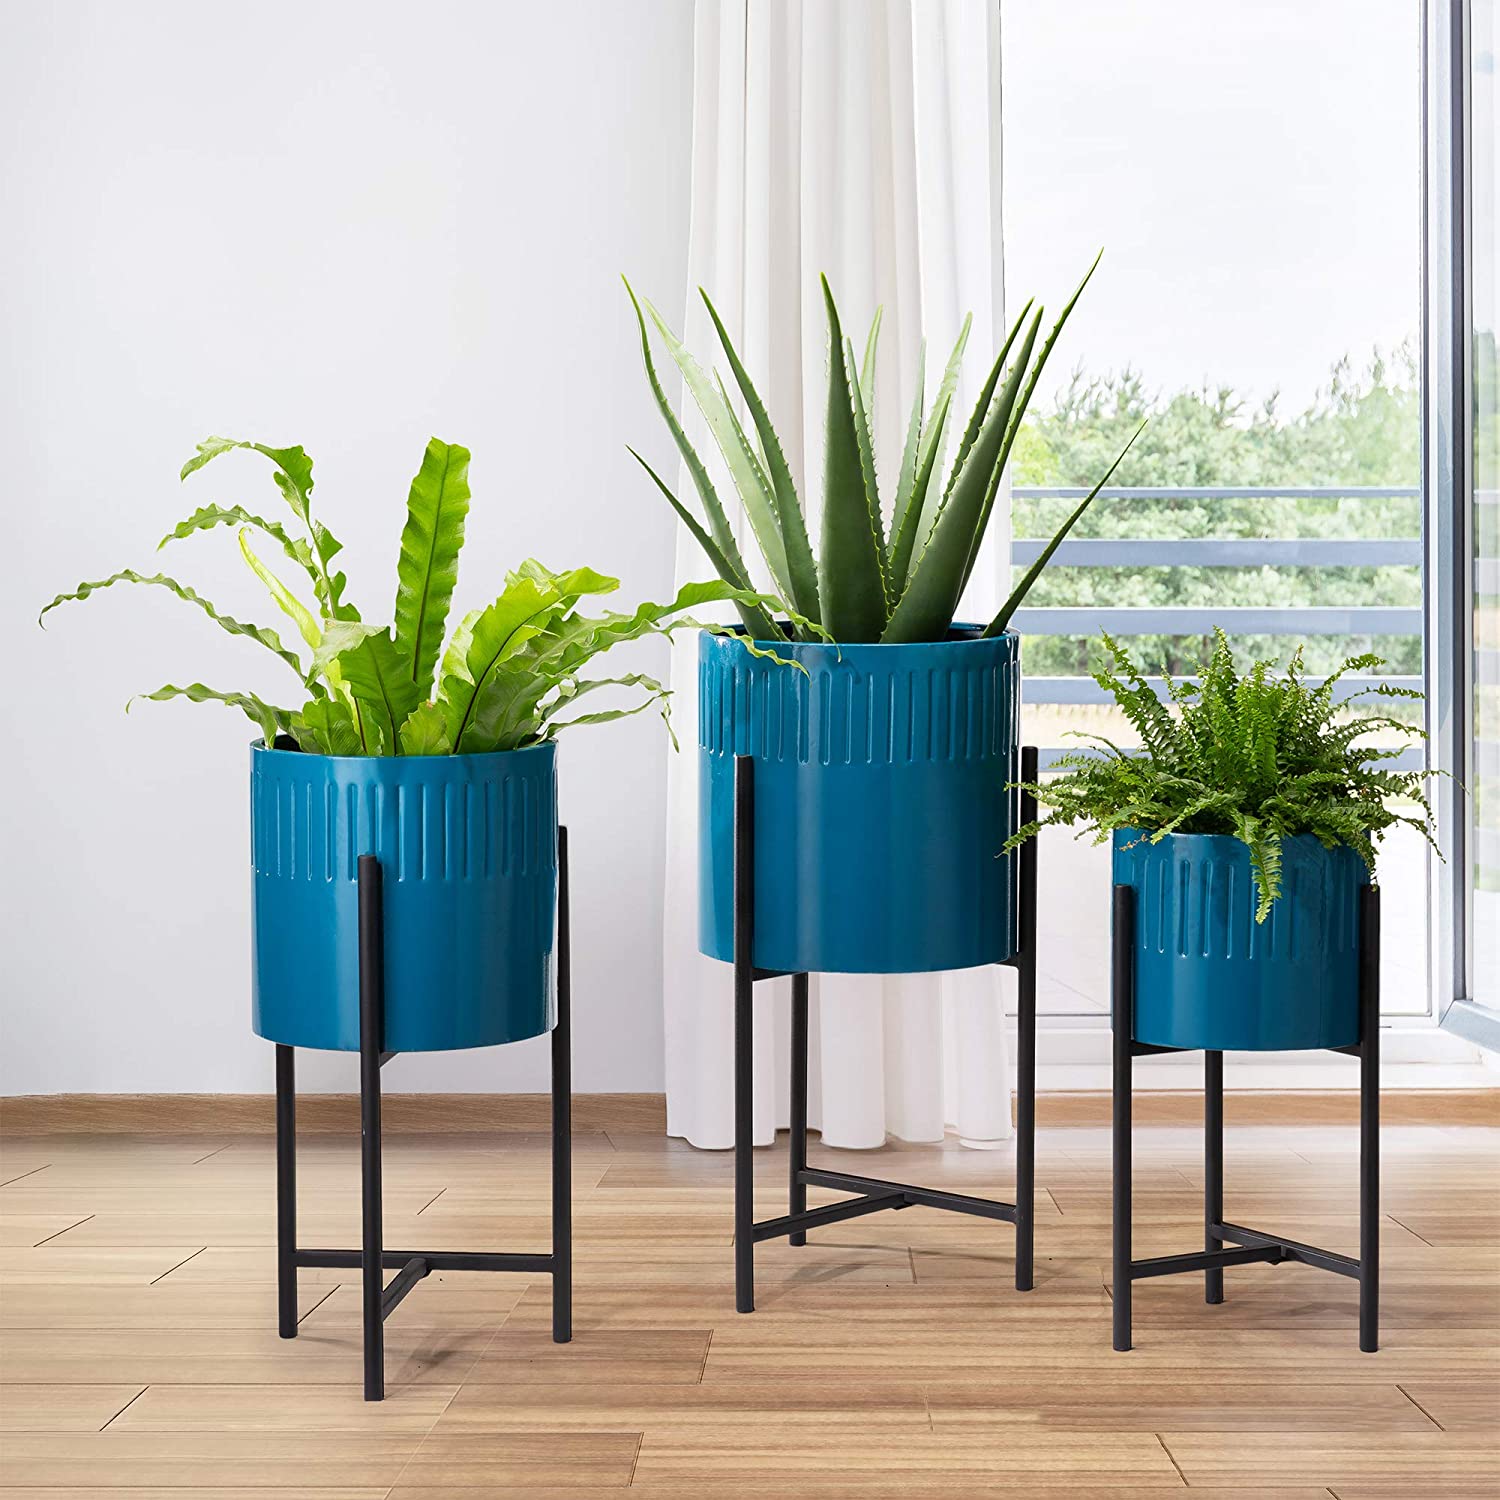 Set of 3 Modern Metal Planter Pots with Mid Century Planter Holders Perfect for Indoor and Outdoor Plants, Non-Adjustable Plant Stand